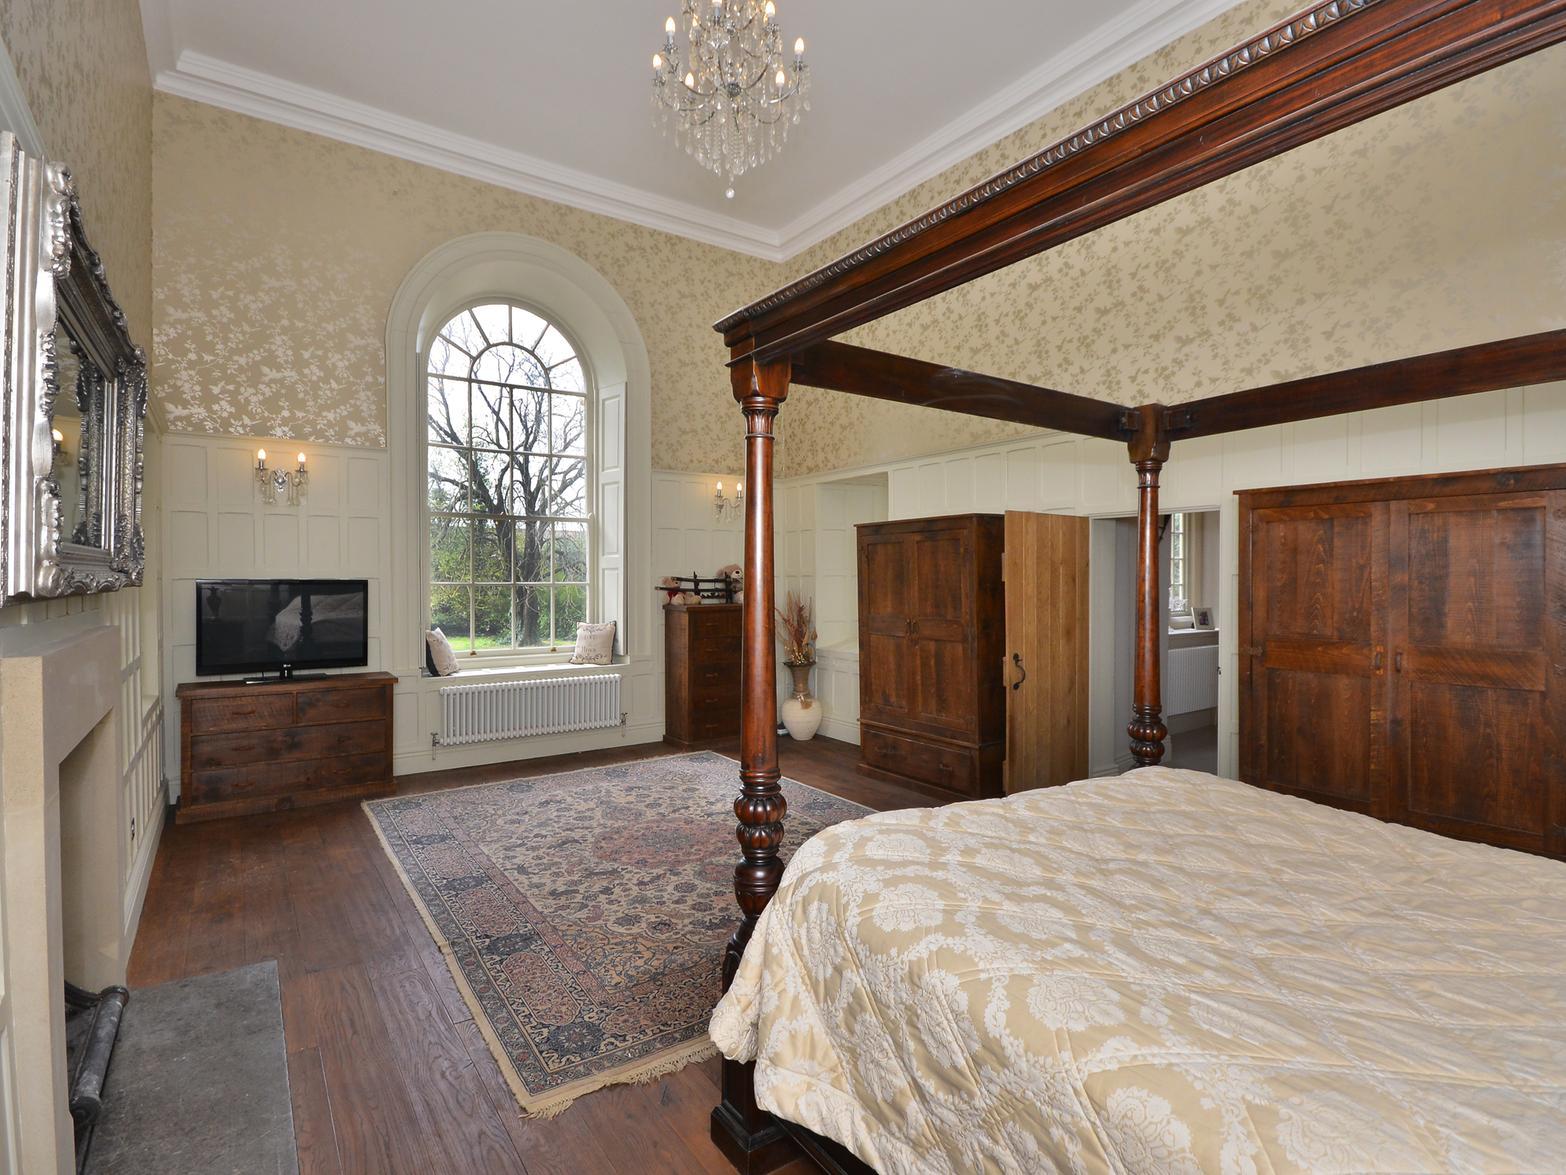 This bedroom has a fantastic view over the gardens.